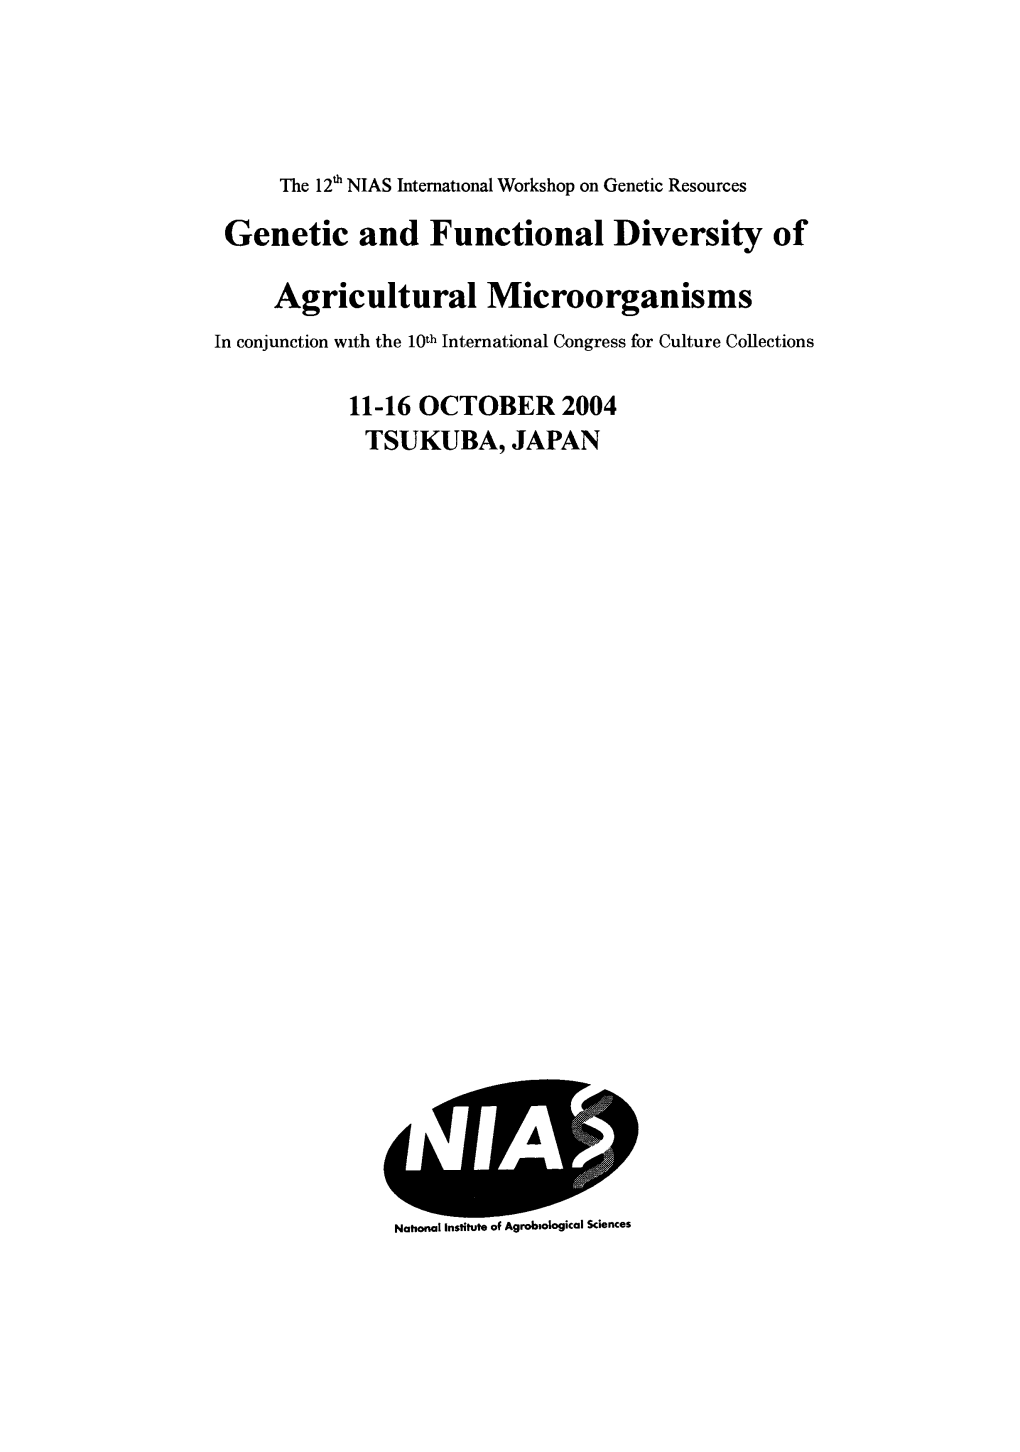 Genetic and Functional Diversity of Agricultural Microorganisms in Conjunction with the 10Th International Congress for Culture Collections